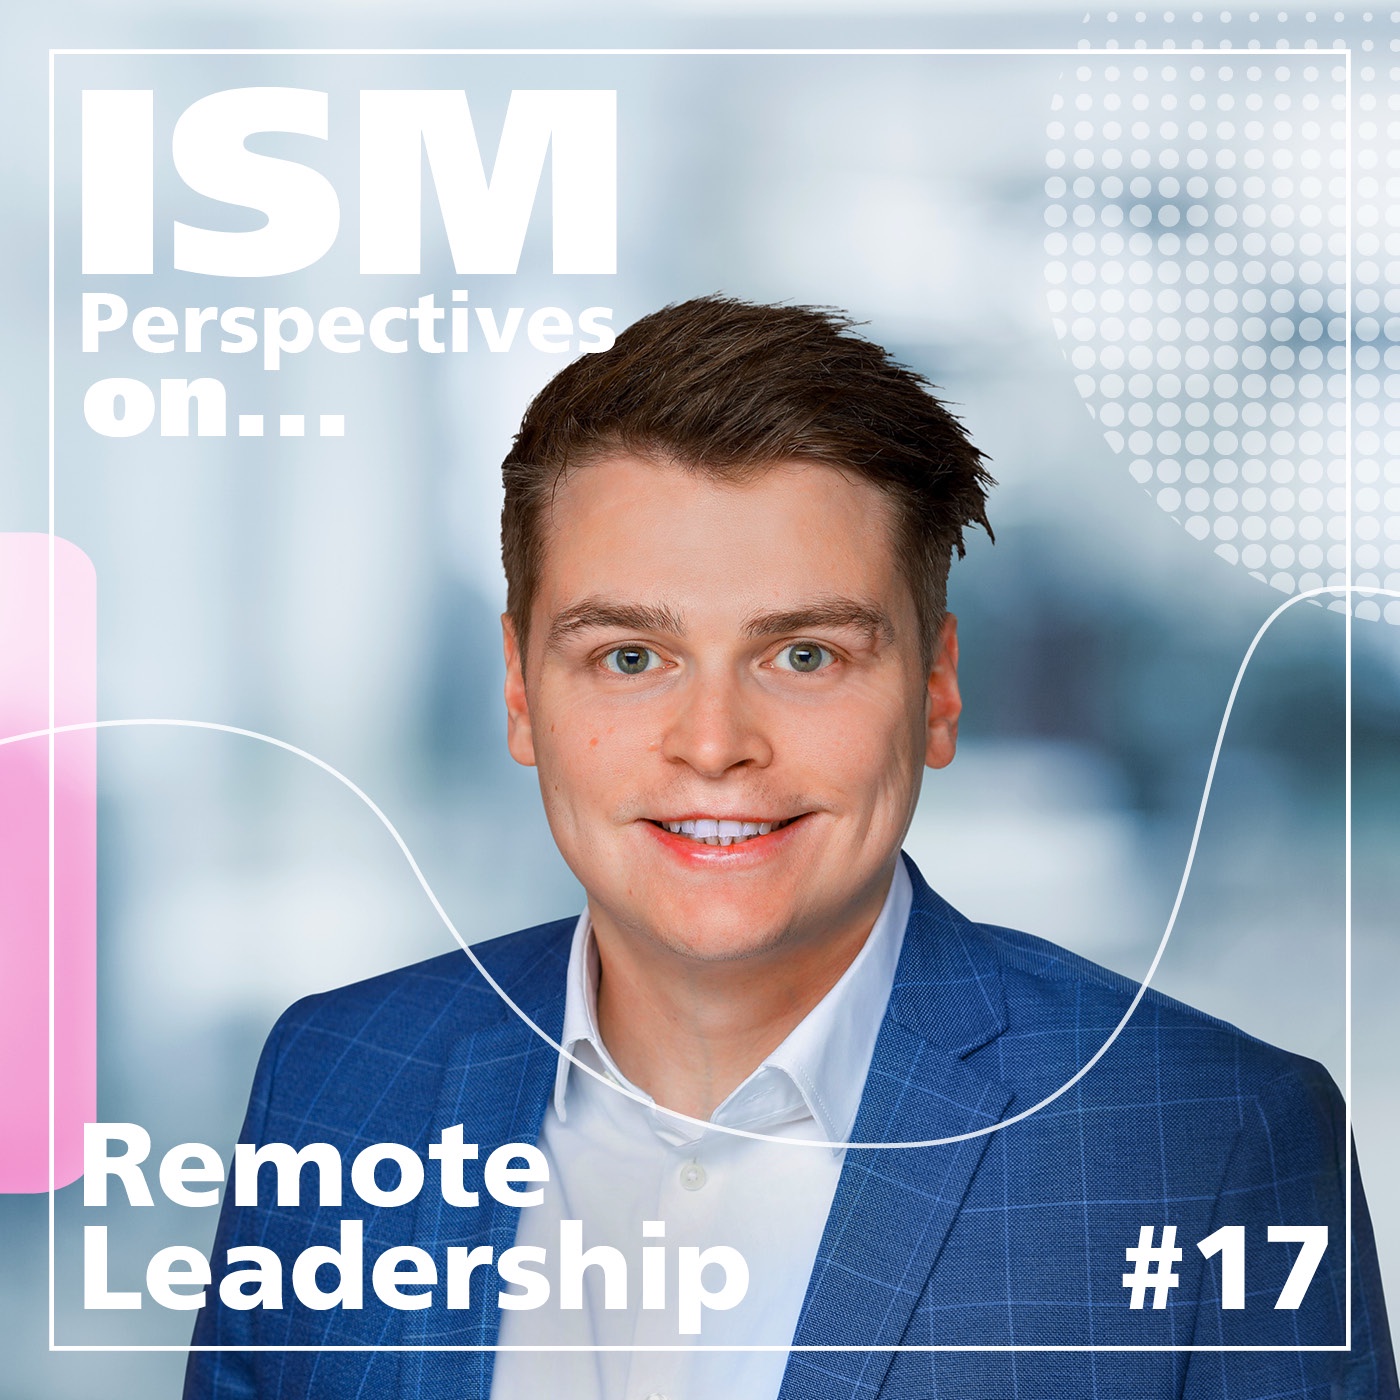 Perspectives on: Remote Leadership